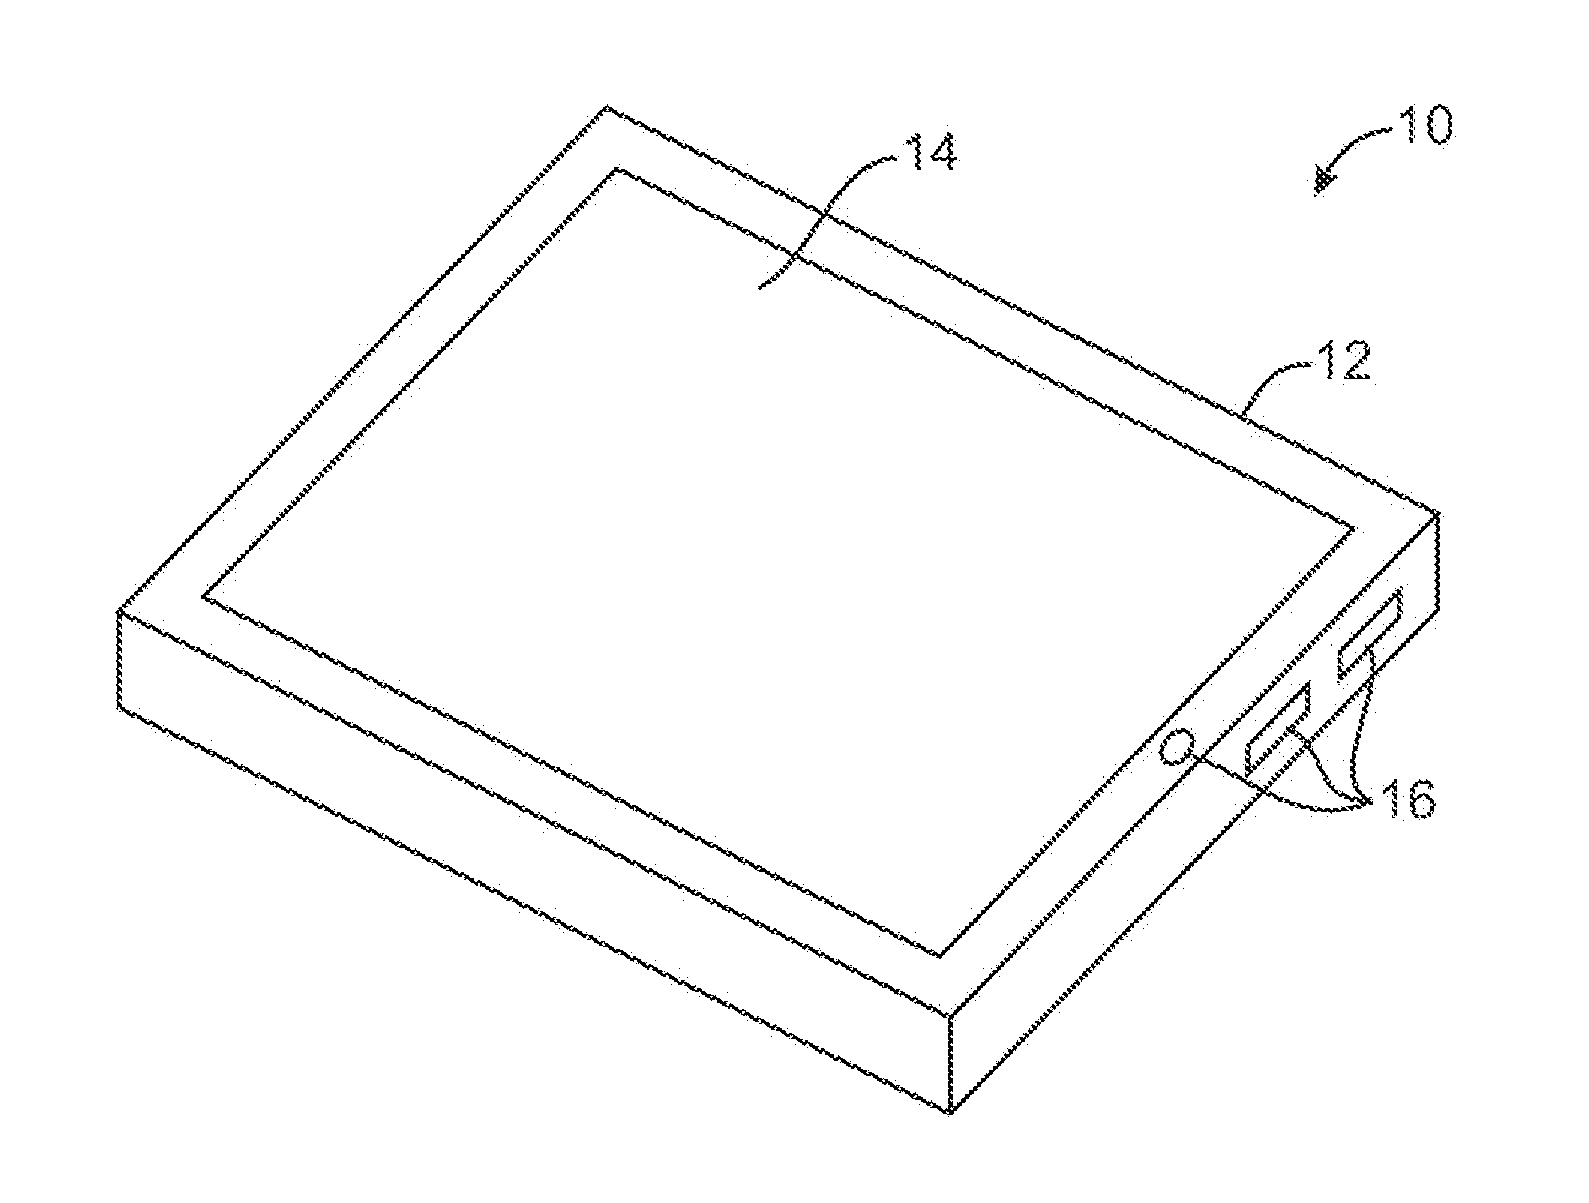 Electric field shielding for in-cell touch type thin-film-transistor liquid crystal displays